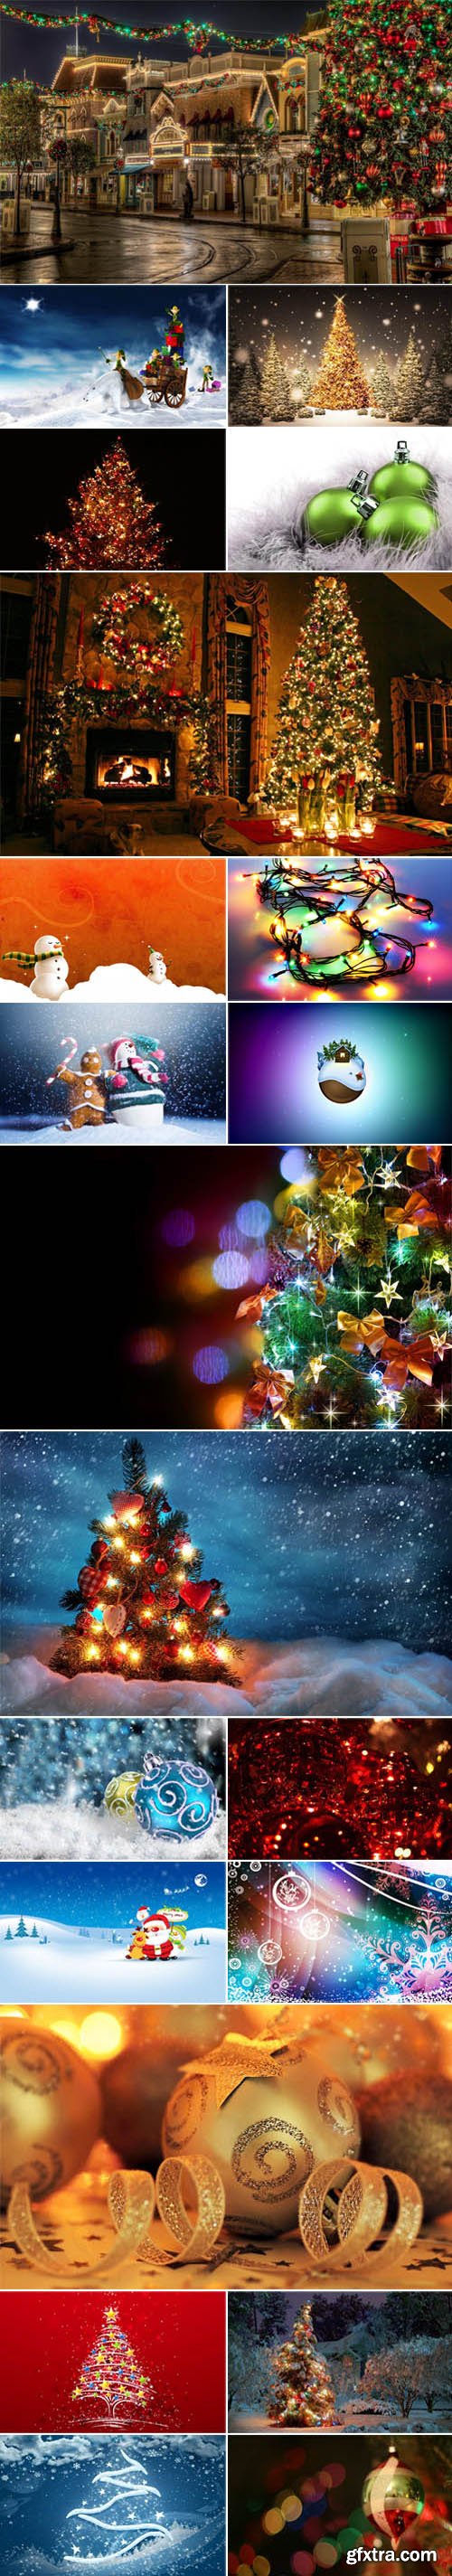 Christmas & New Year Photos Collection 3